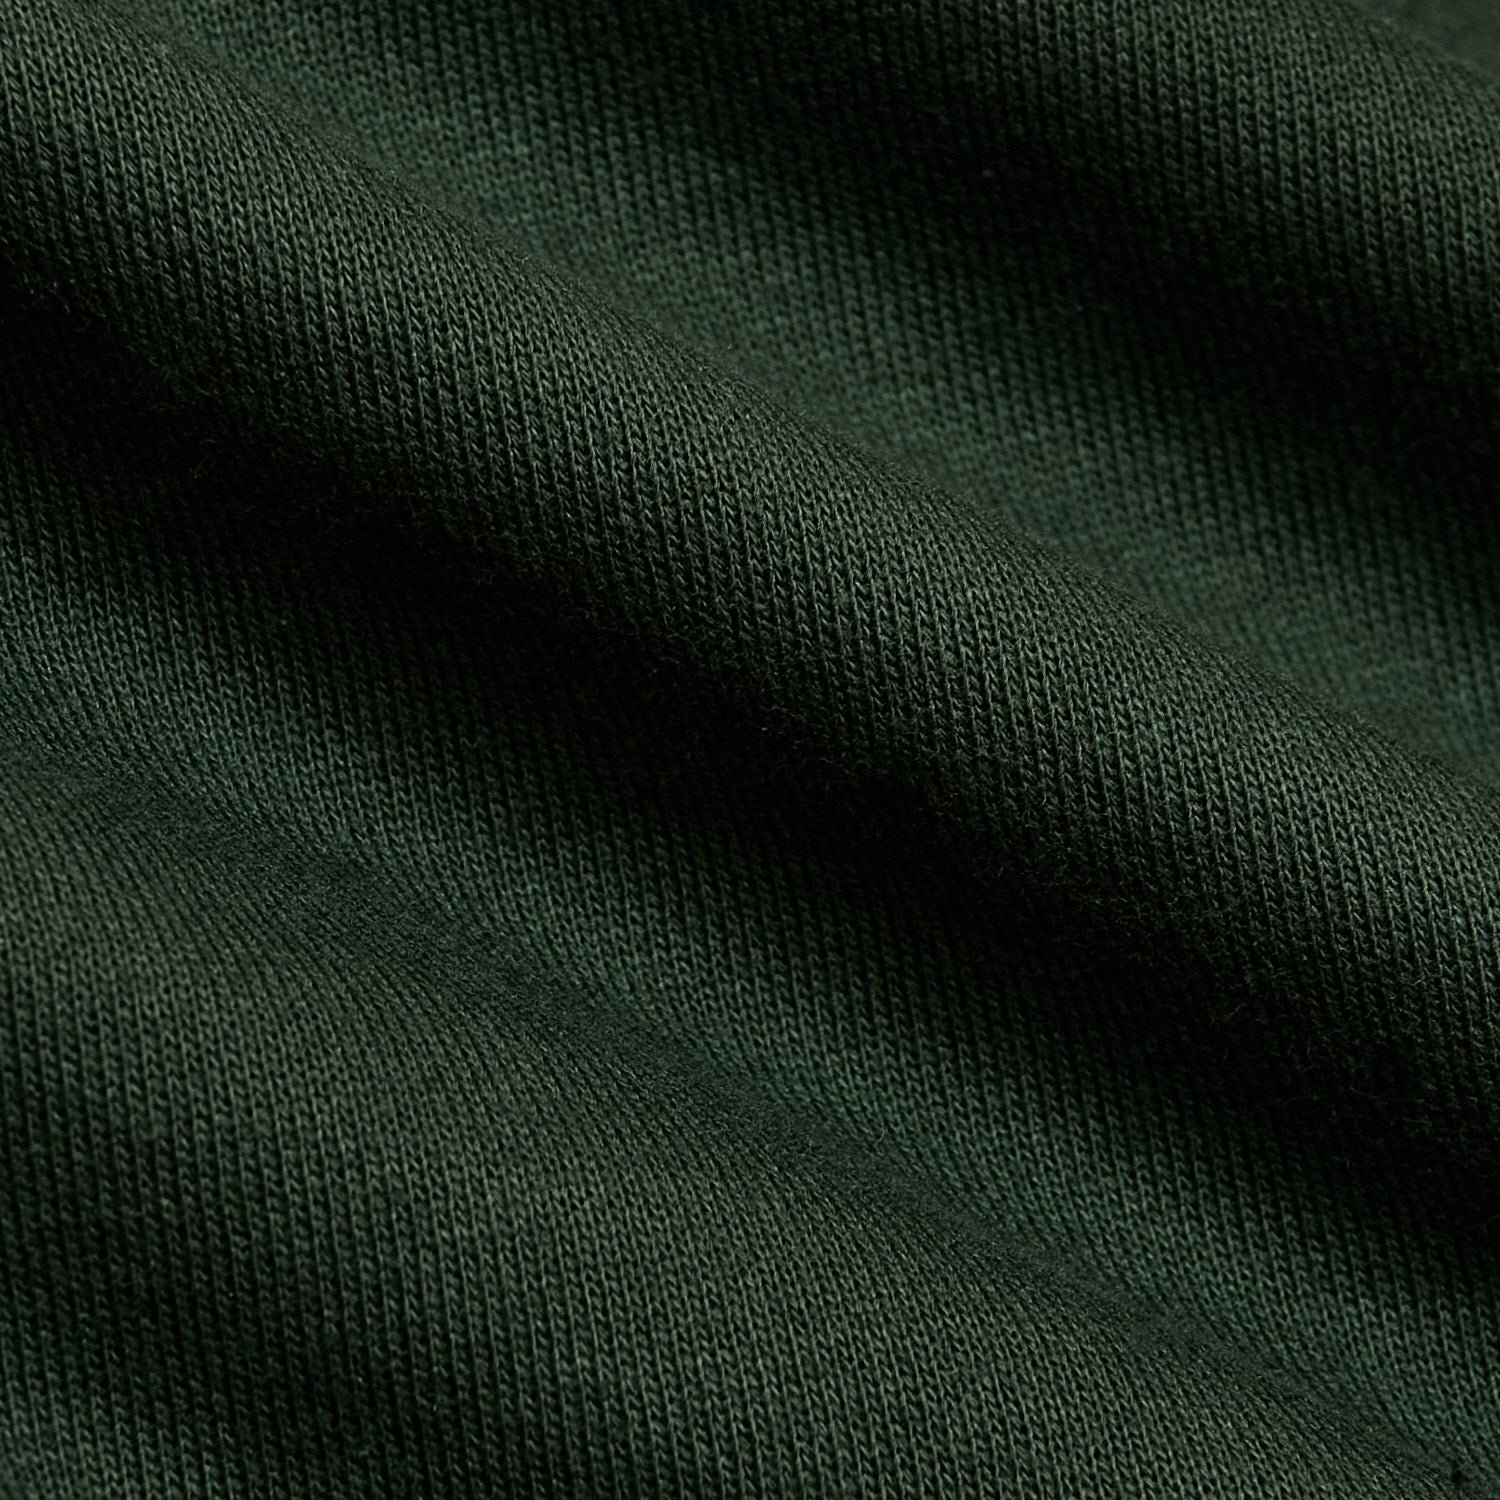 Hunter Green Fleece French Terry Pullover Hoodie